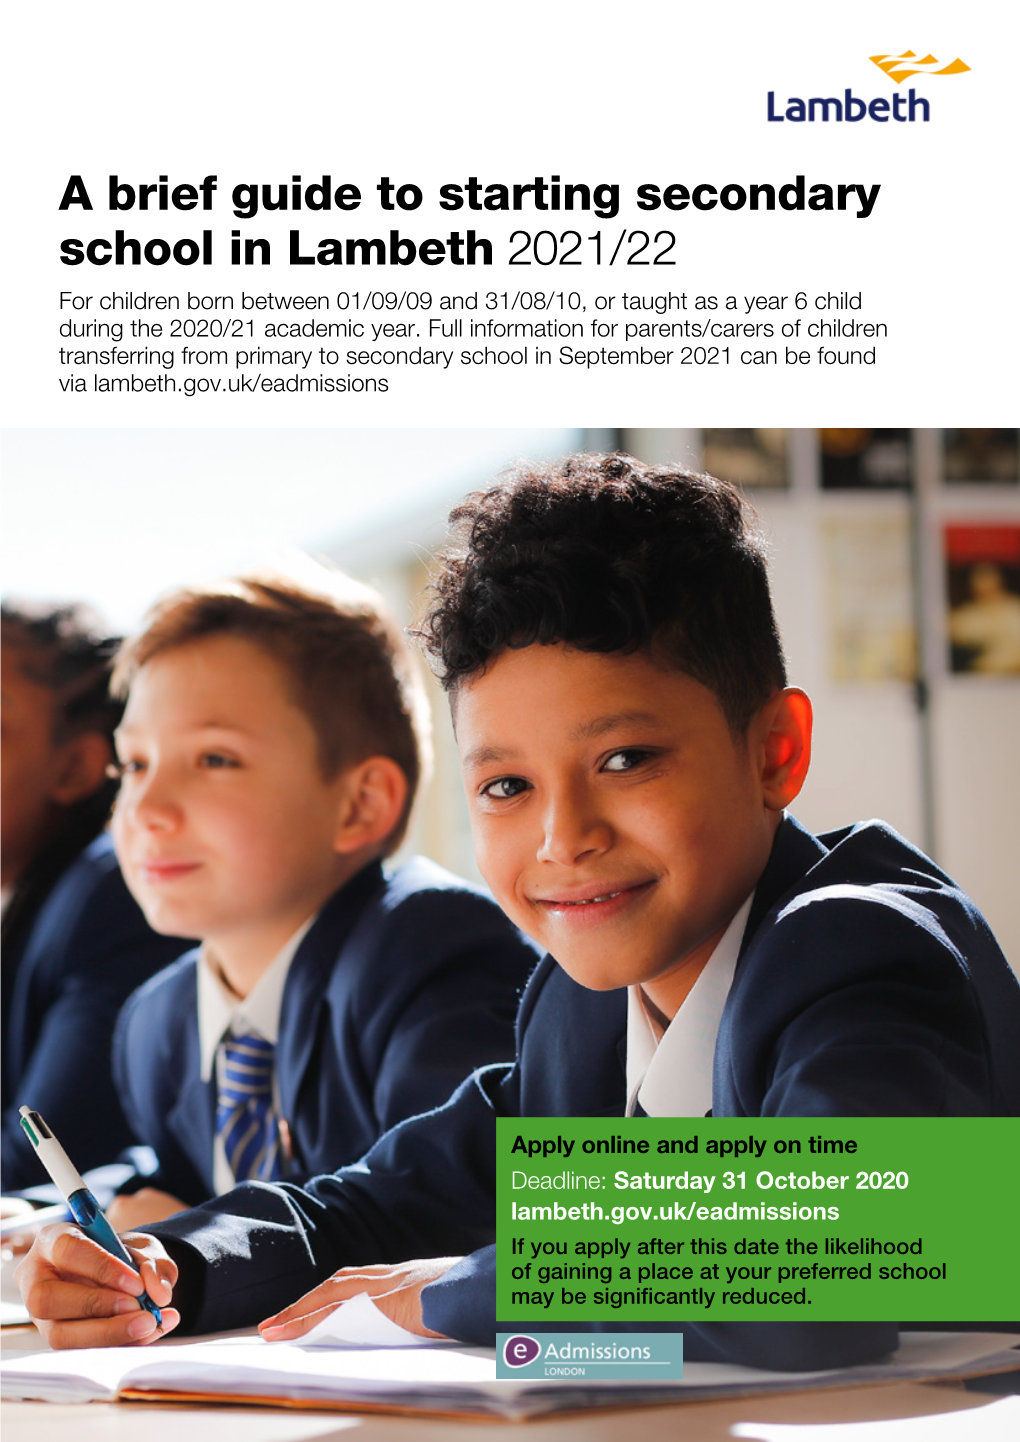 A Brief Guide to Starting Secondary School in Lambeth 2021/22